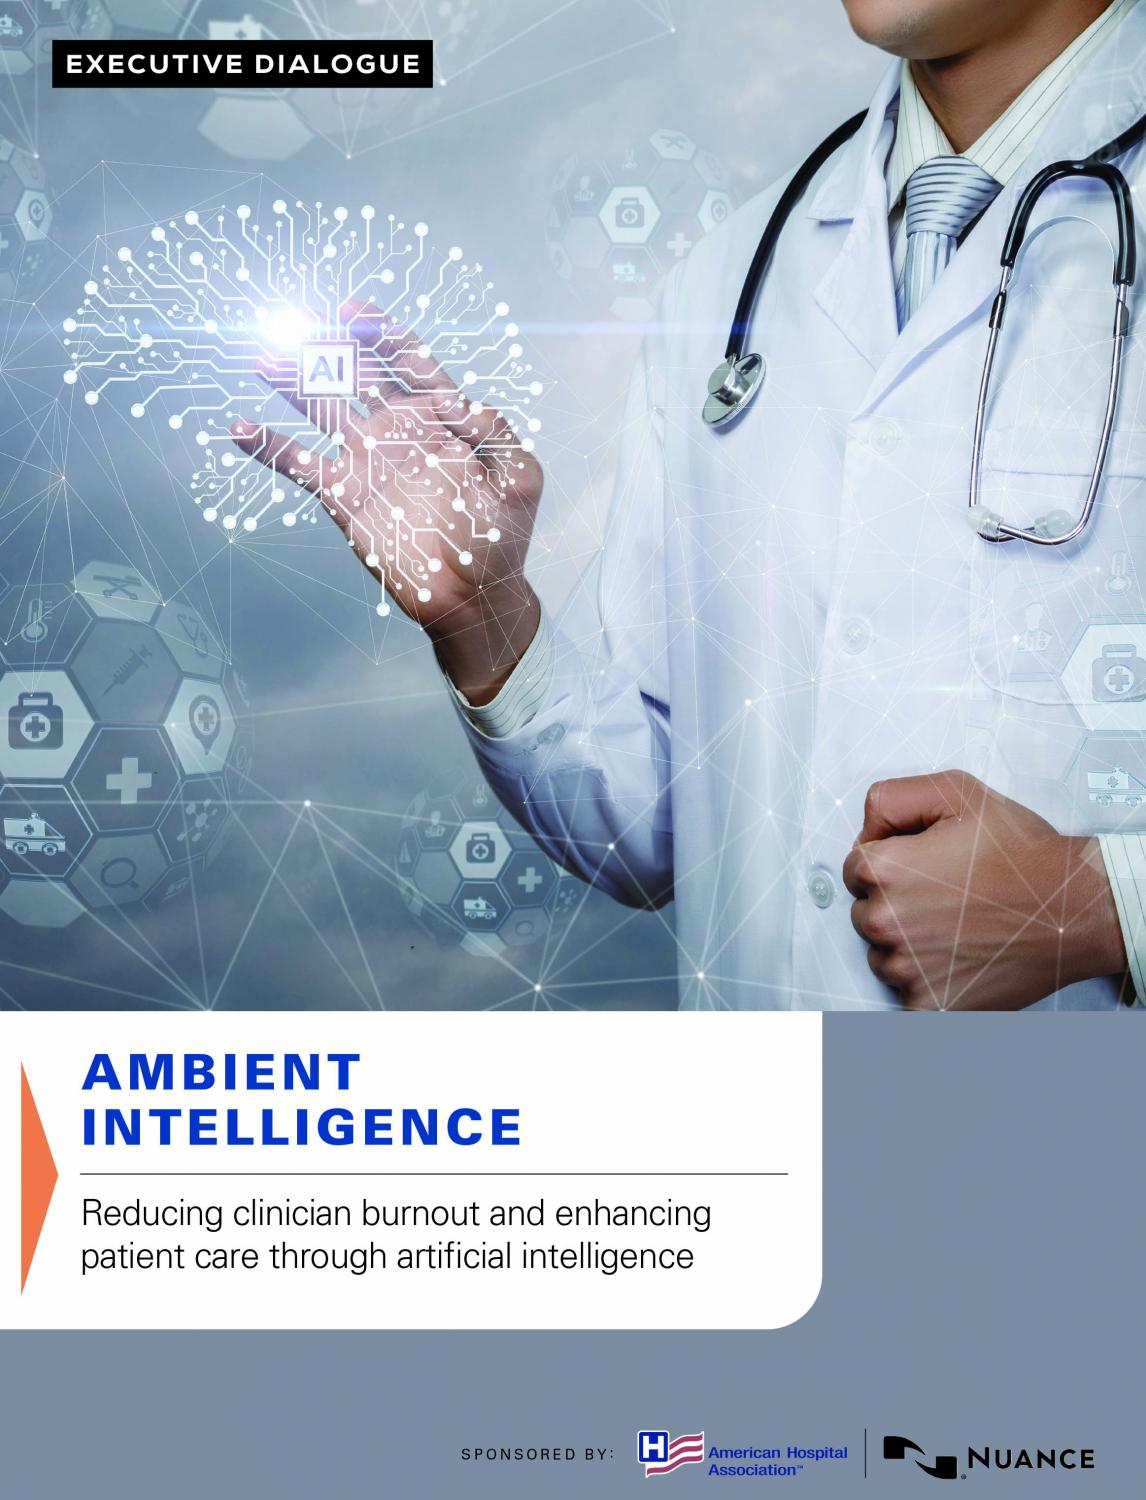 Nuance Ambient Intelligence Dialogue